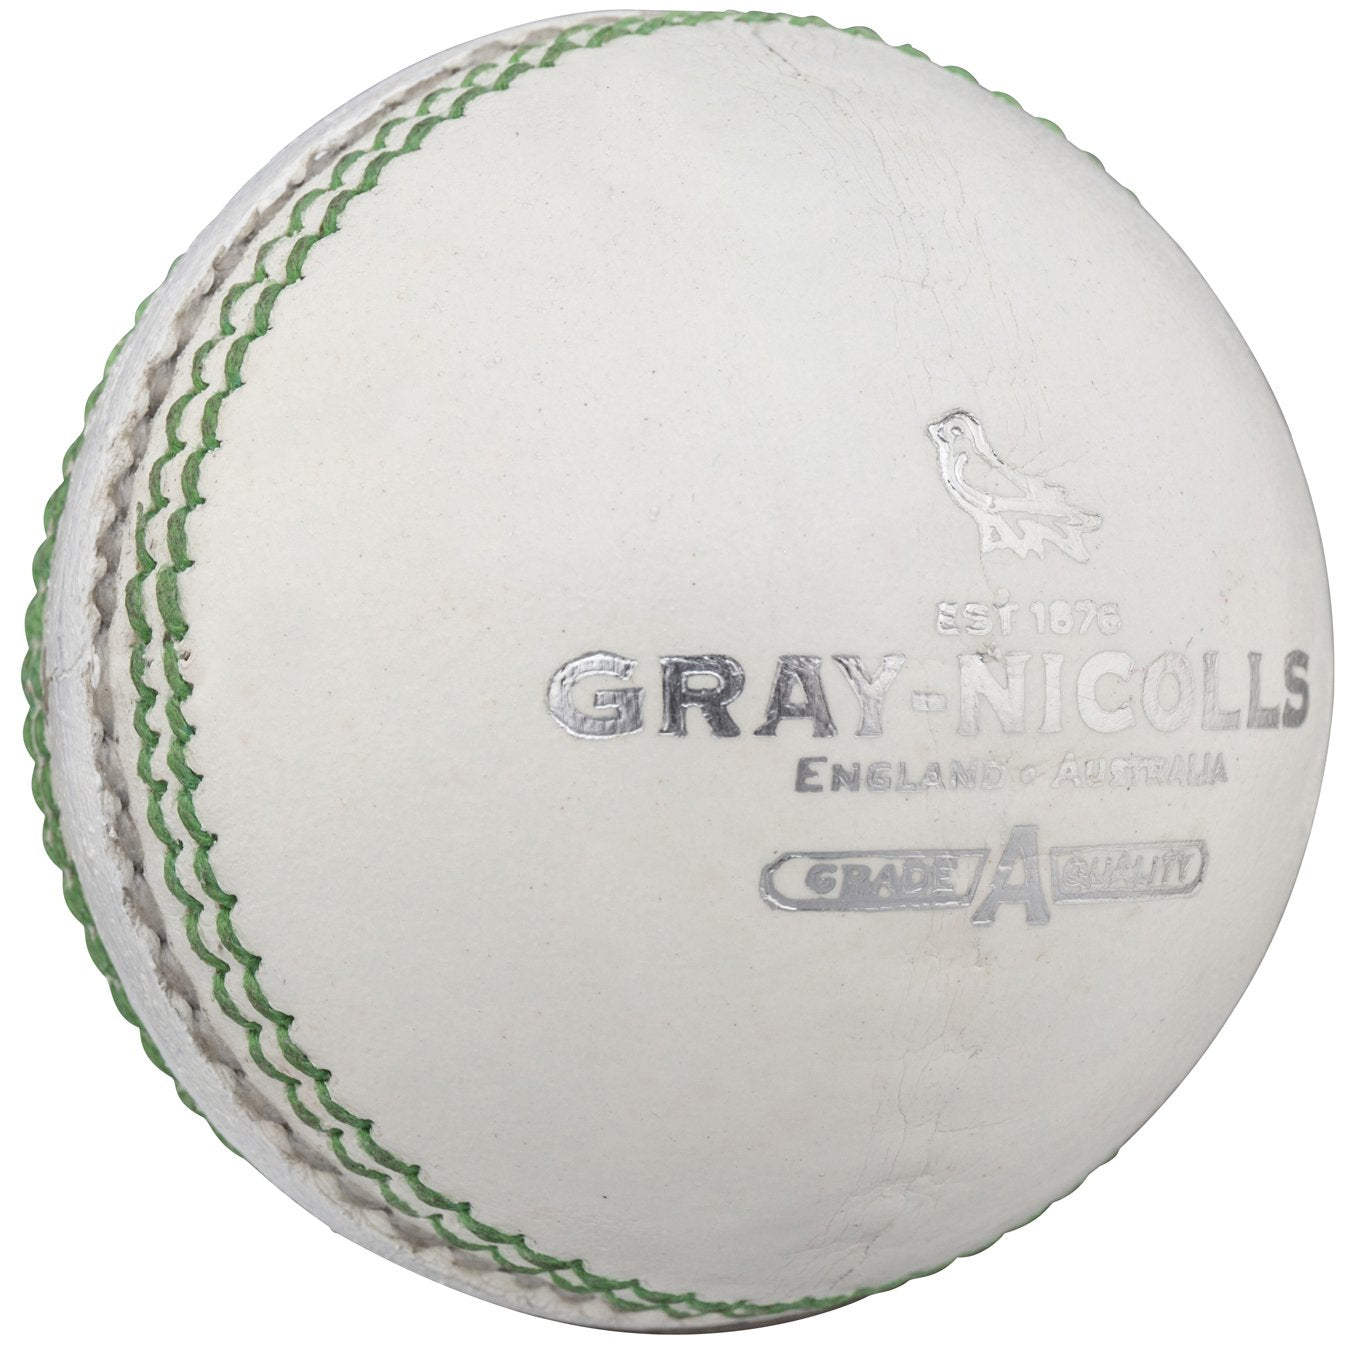 CDAL18Ball Crest Special 156g White Back